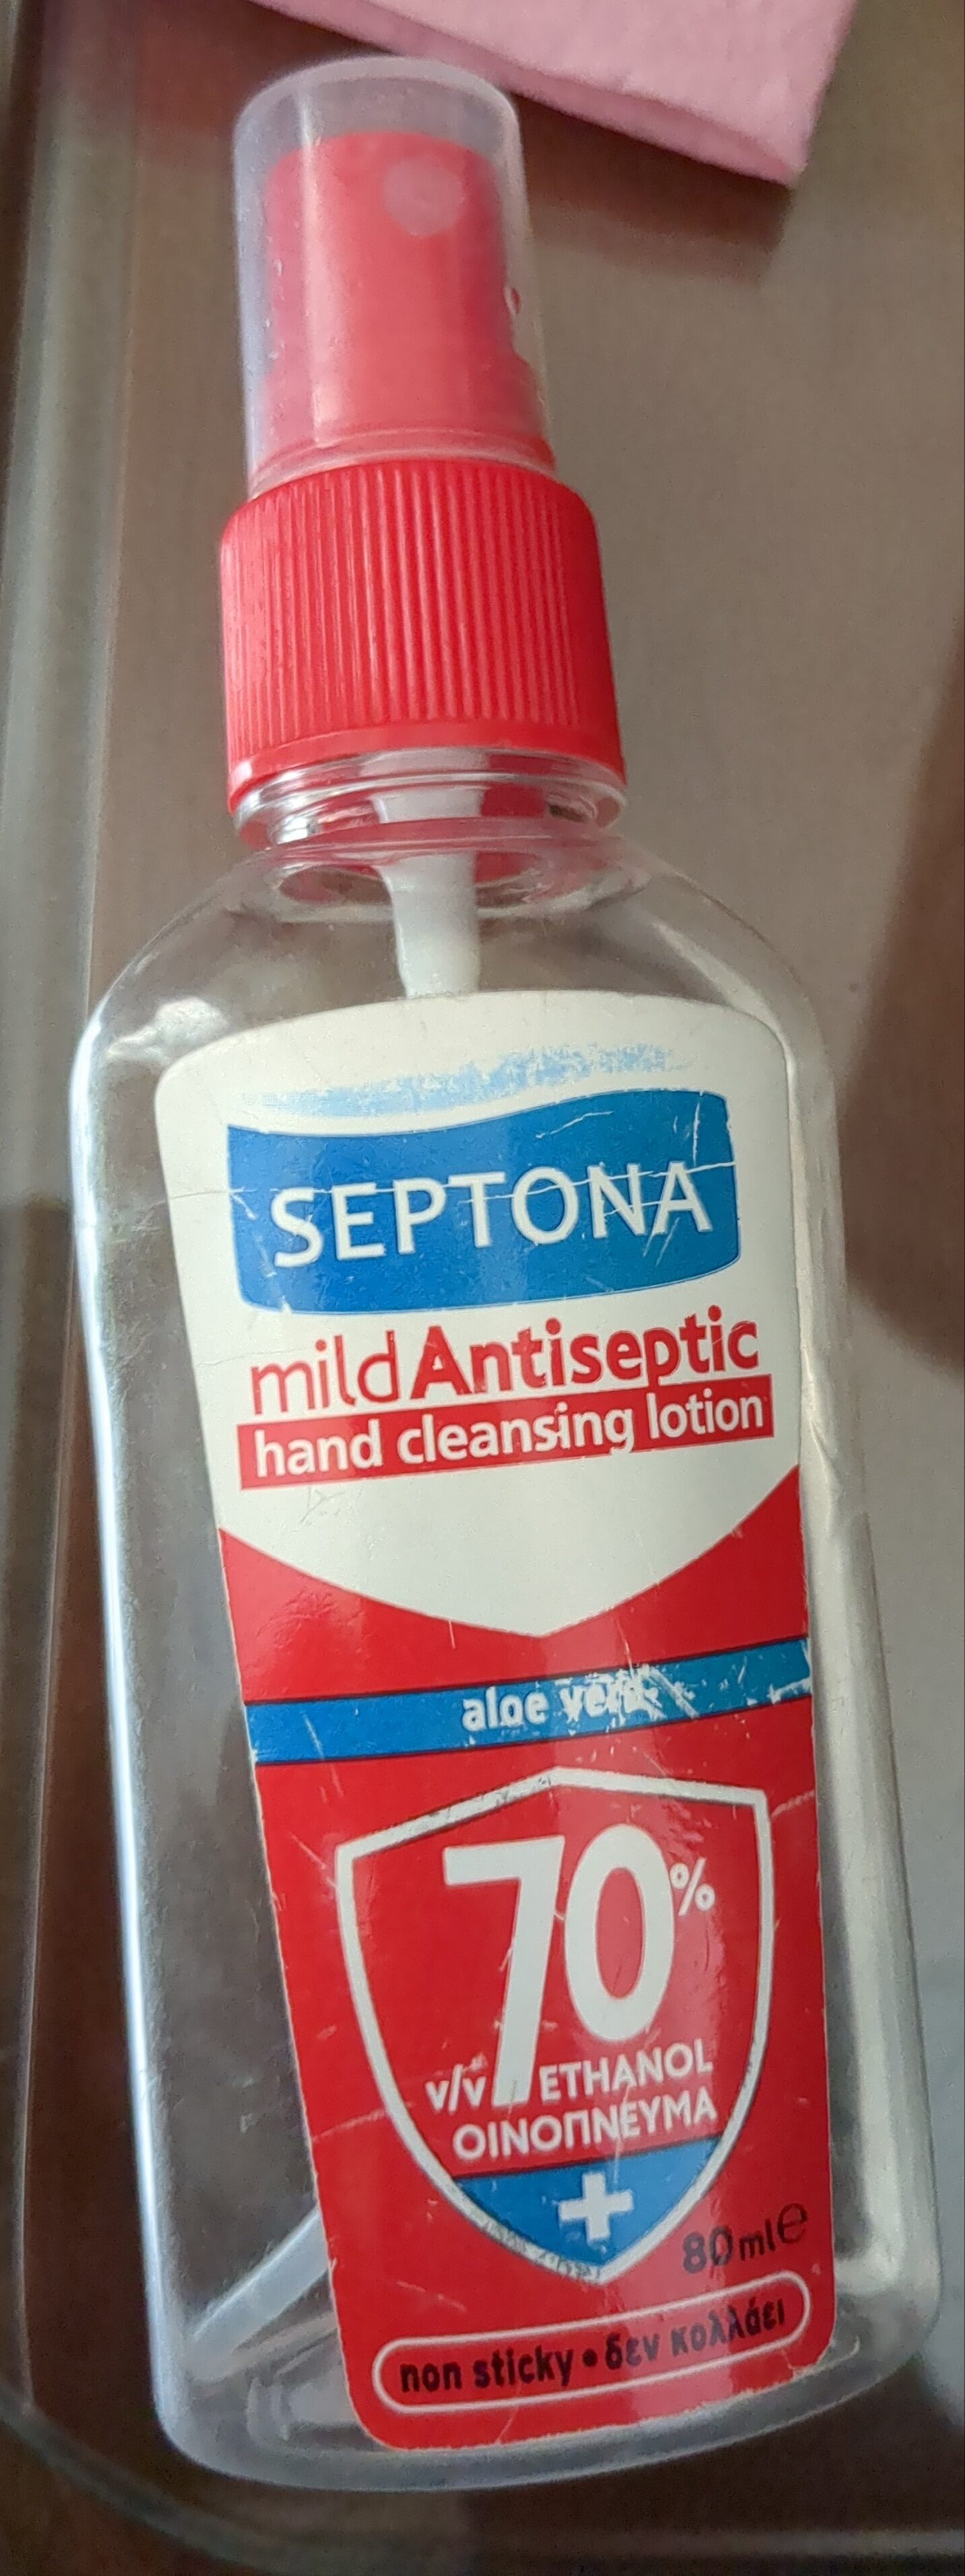 mild Antiseptic hand cleansing lotion - 製品 - en